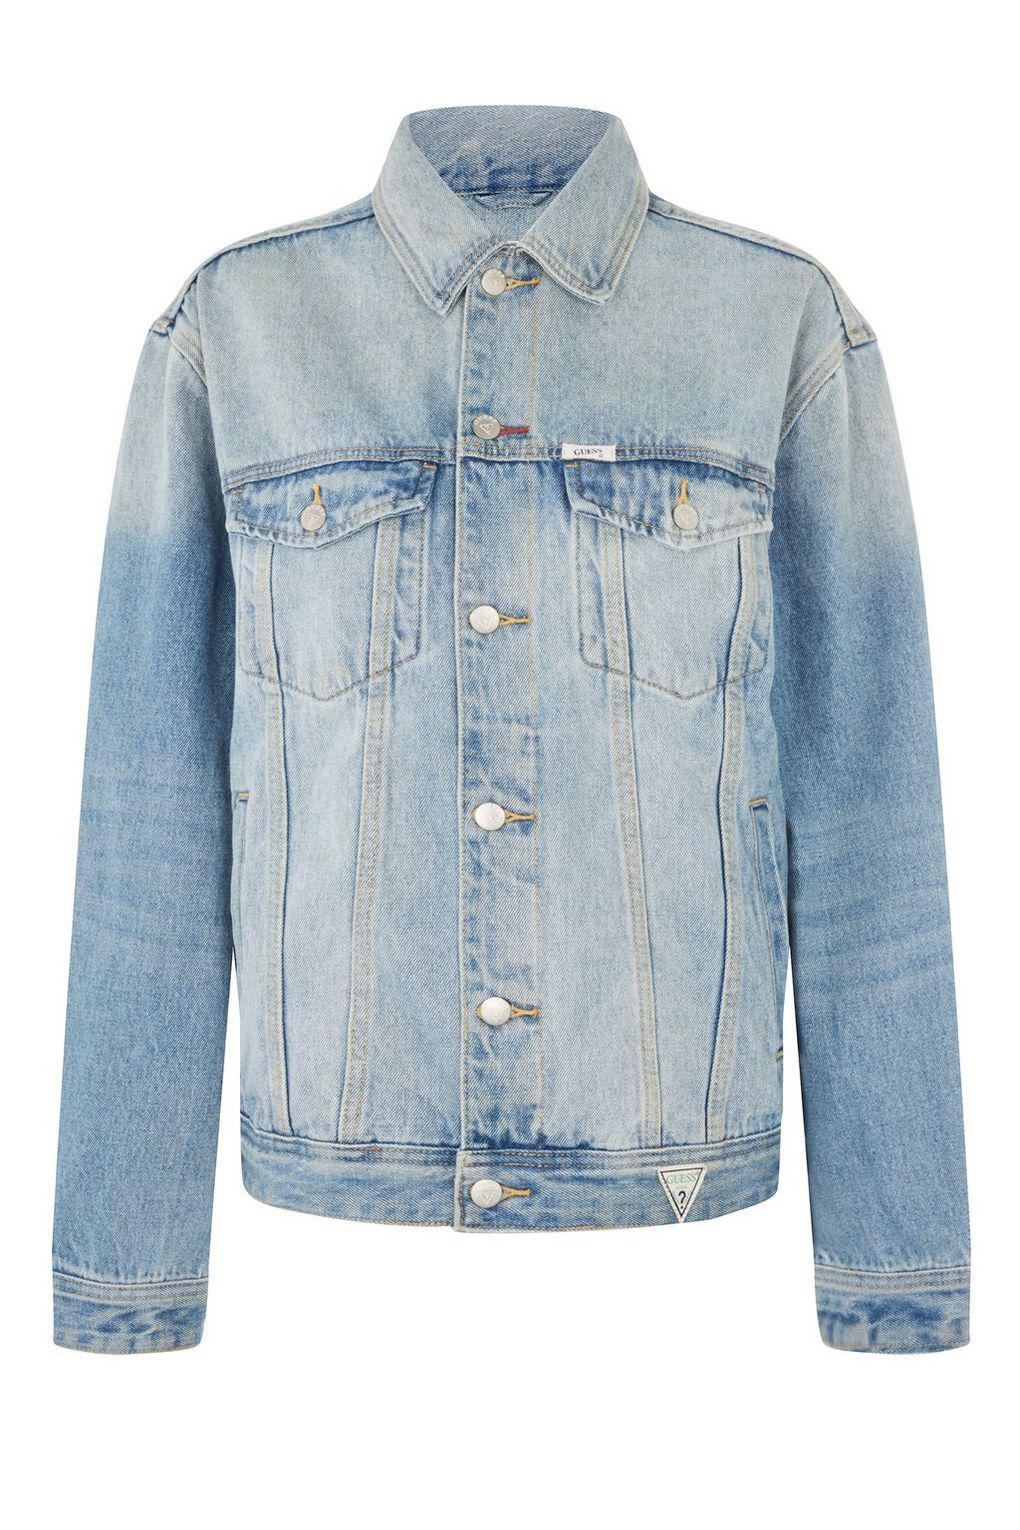 Guess Oversized Denim Logo Jacket By Guess Jeans in Blue - Lyst